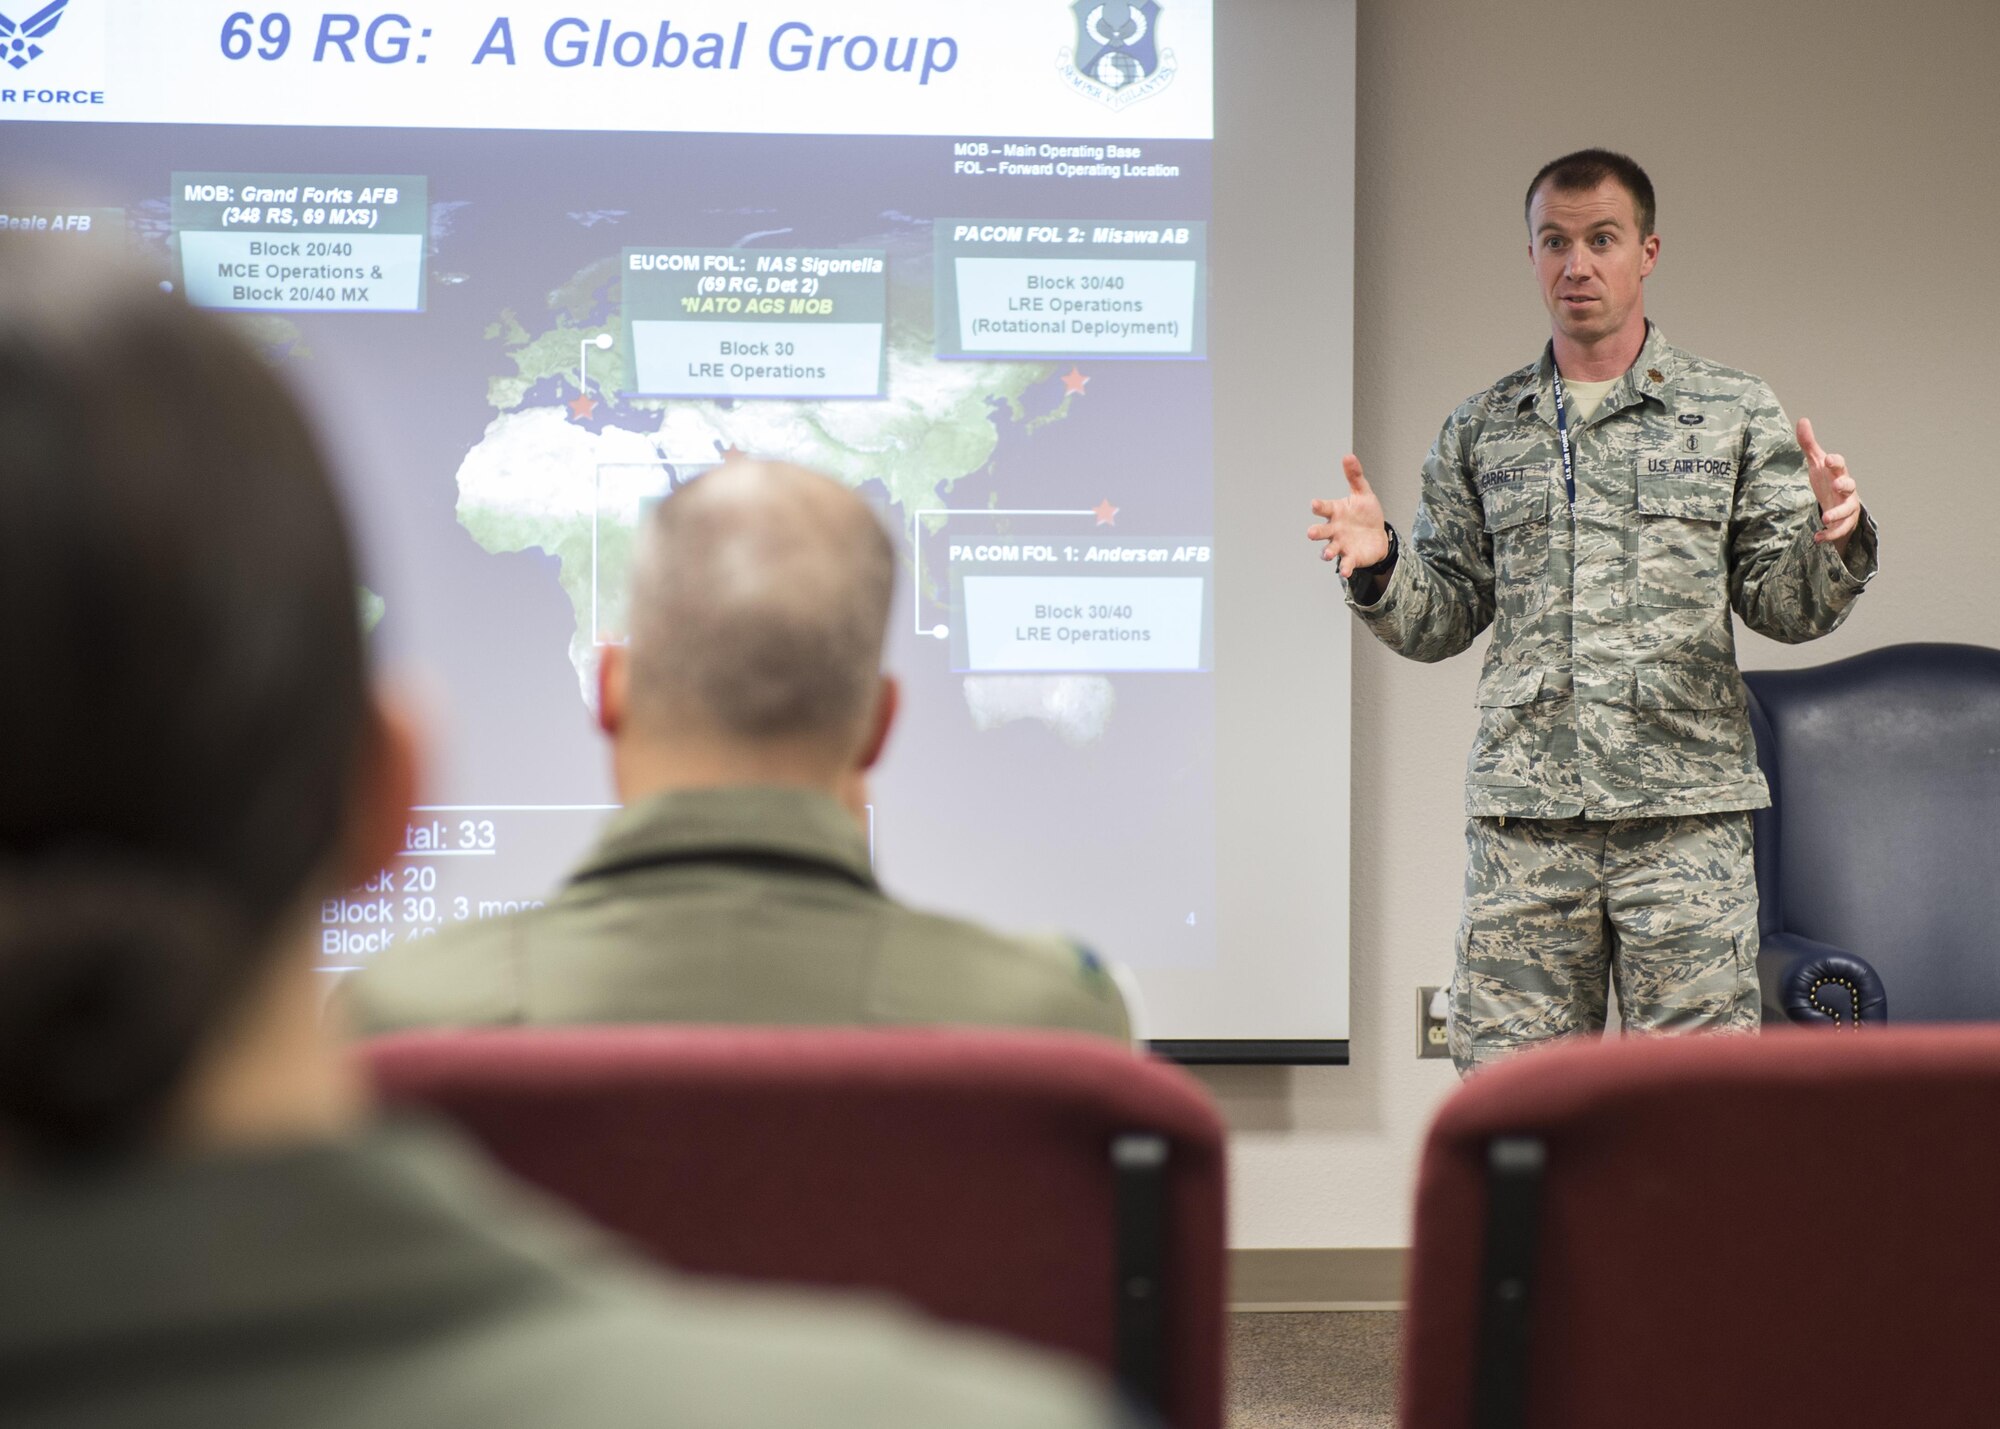 Maj. Zachary Garrett, a 49th Medical Group aerospace and operational physiologist, briefs personnel about the stress and sleep hygiene during Top Knife, Feb. 9, 2017 at Holloman Air Force Base, N.M. During Top Knife, flight surgeons, physiologists, psychologists and chaplains from across the Air Force came to Holloman and were taught about the current challenges facing RPA personnel. (U.S. Air Force photo by Senior Airman Emily Kenney)